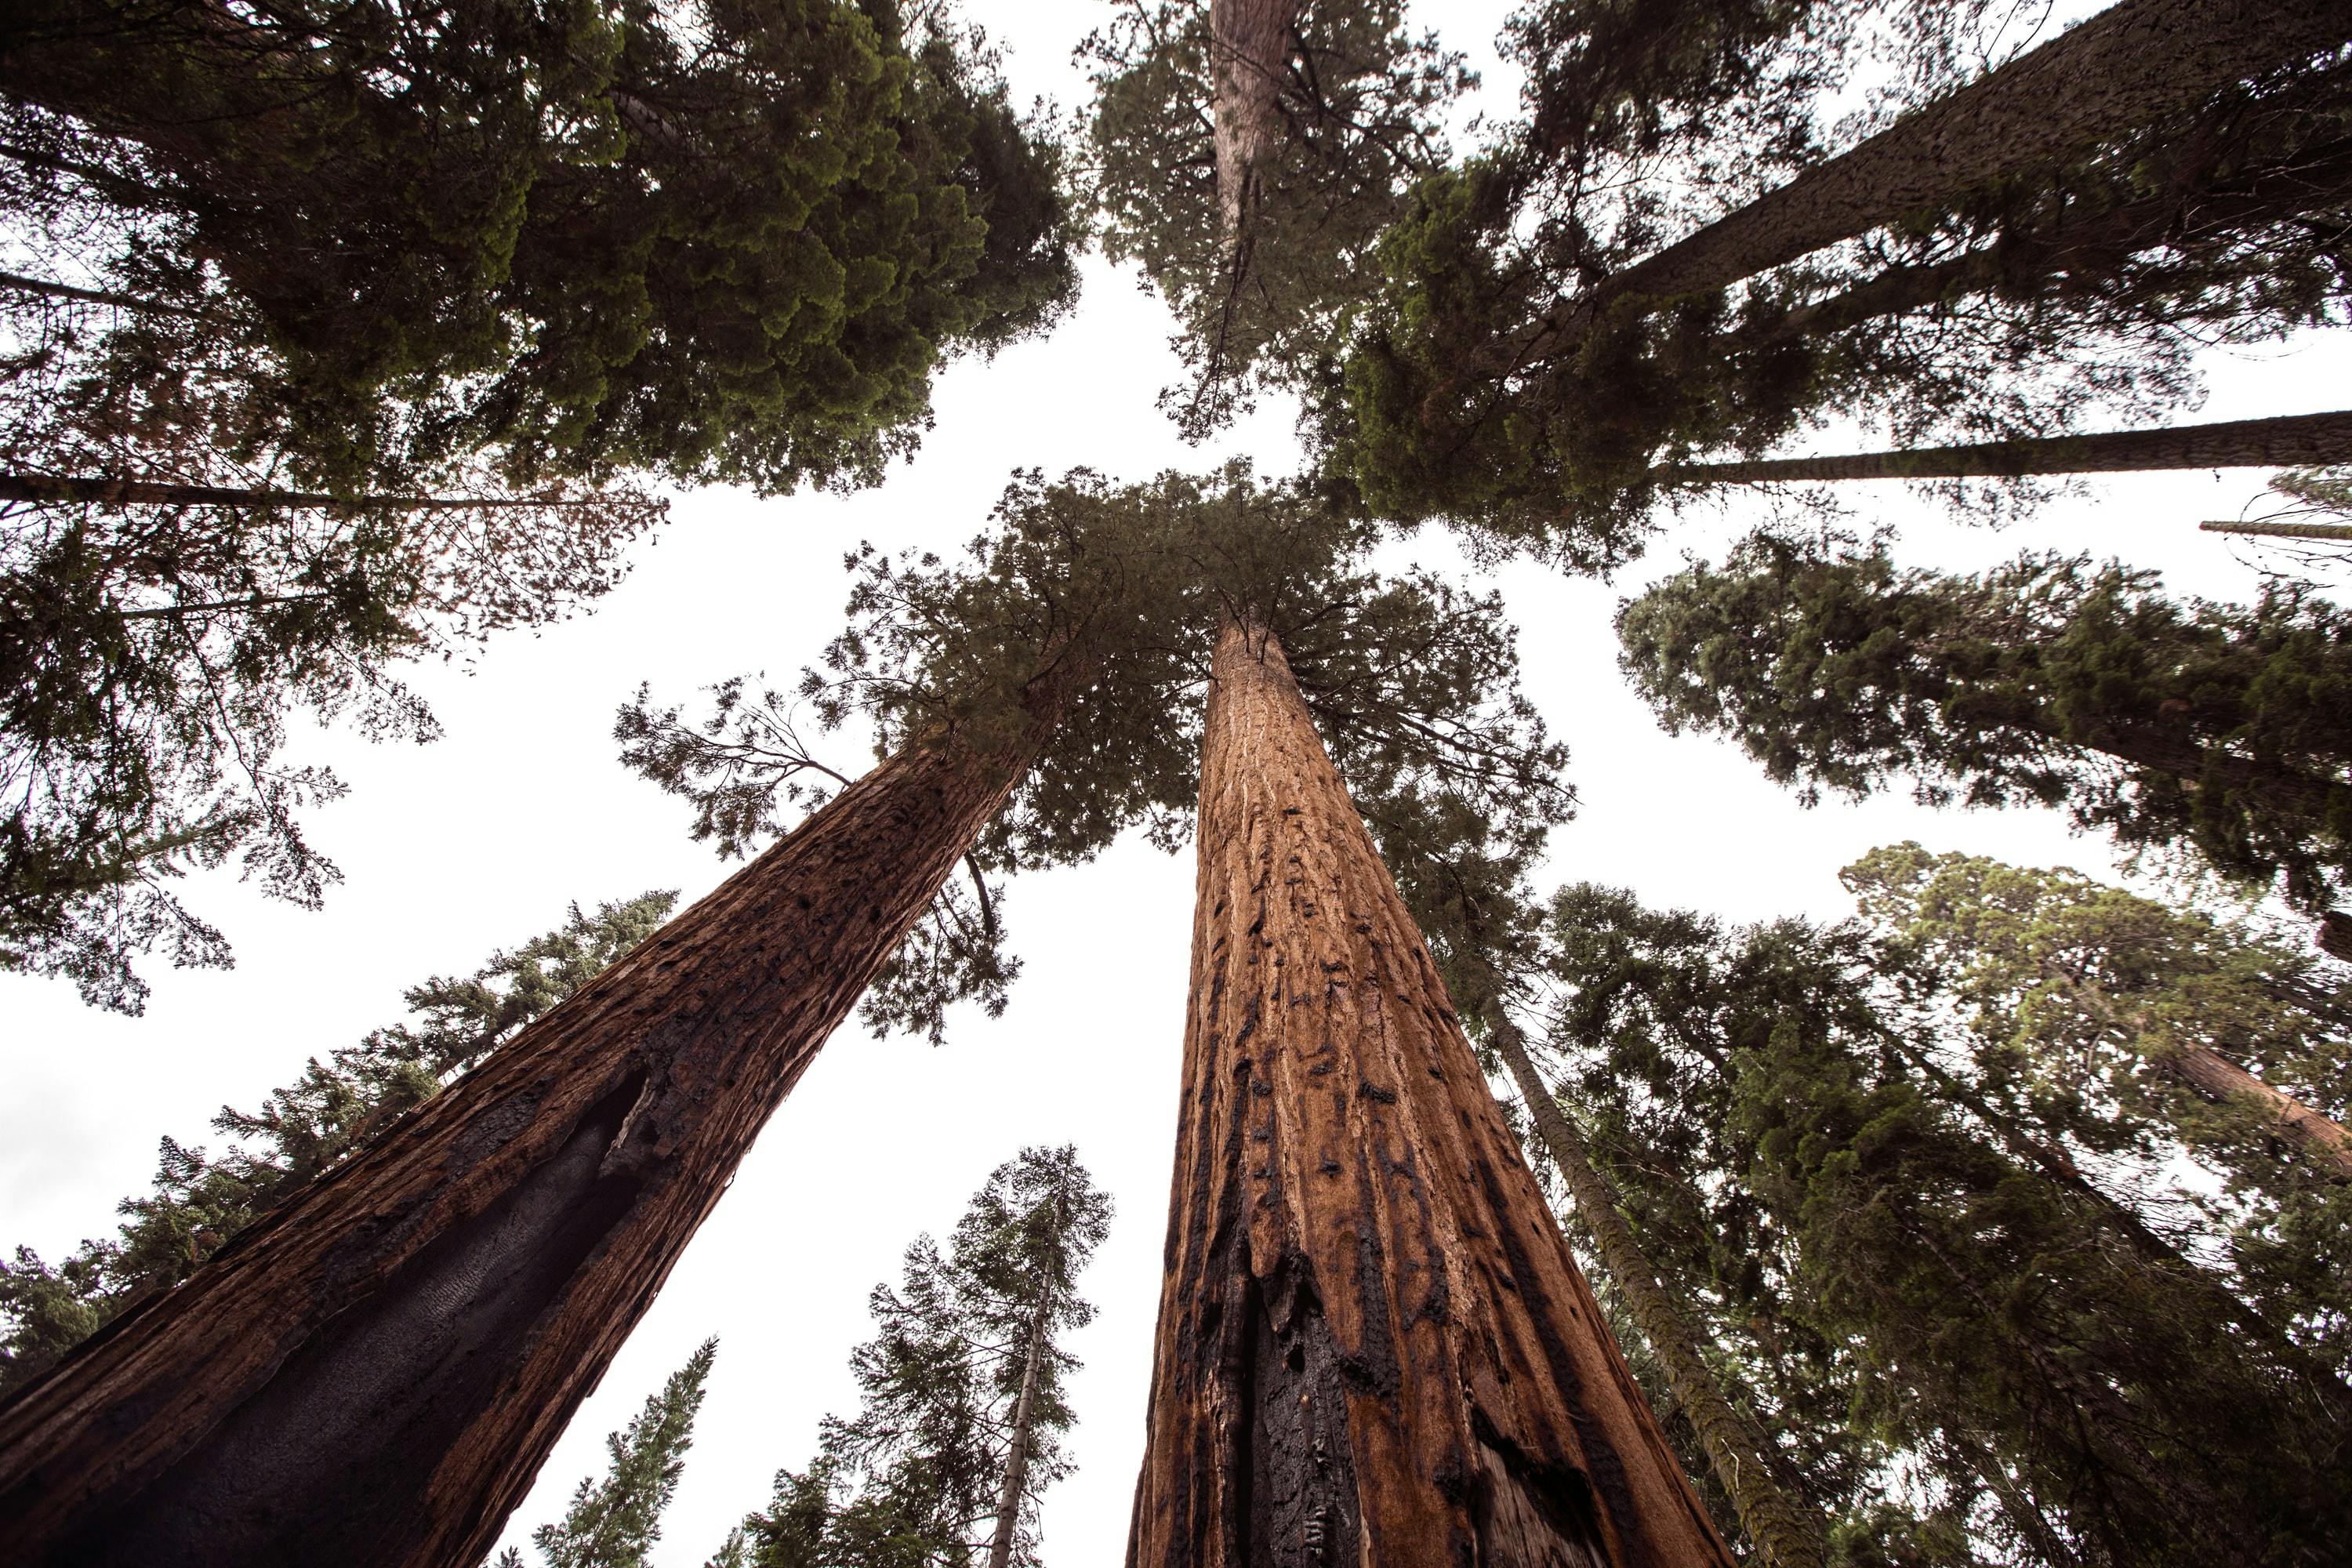 Looking up at towering Redwood trees